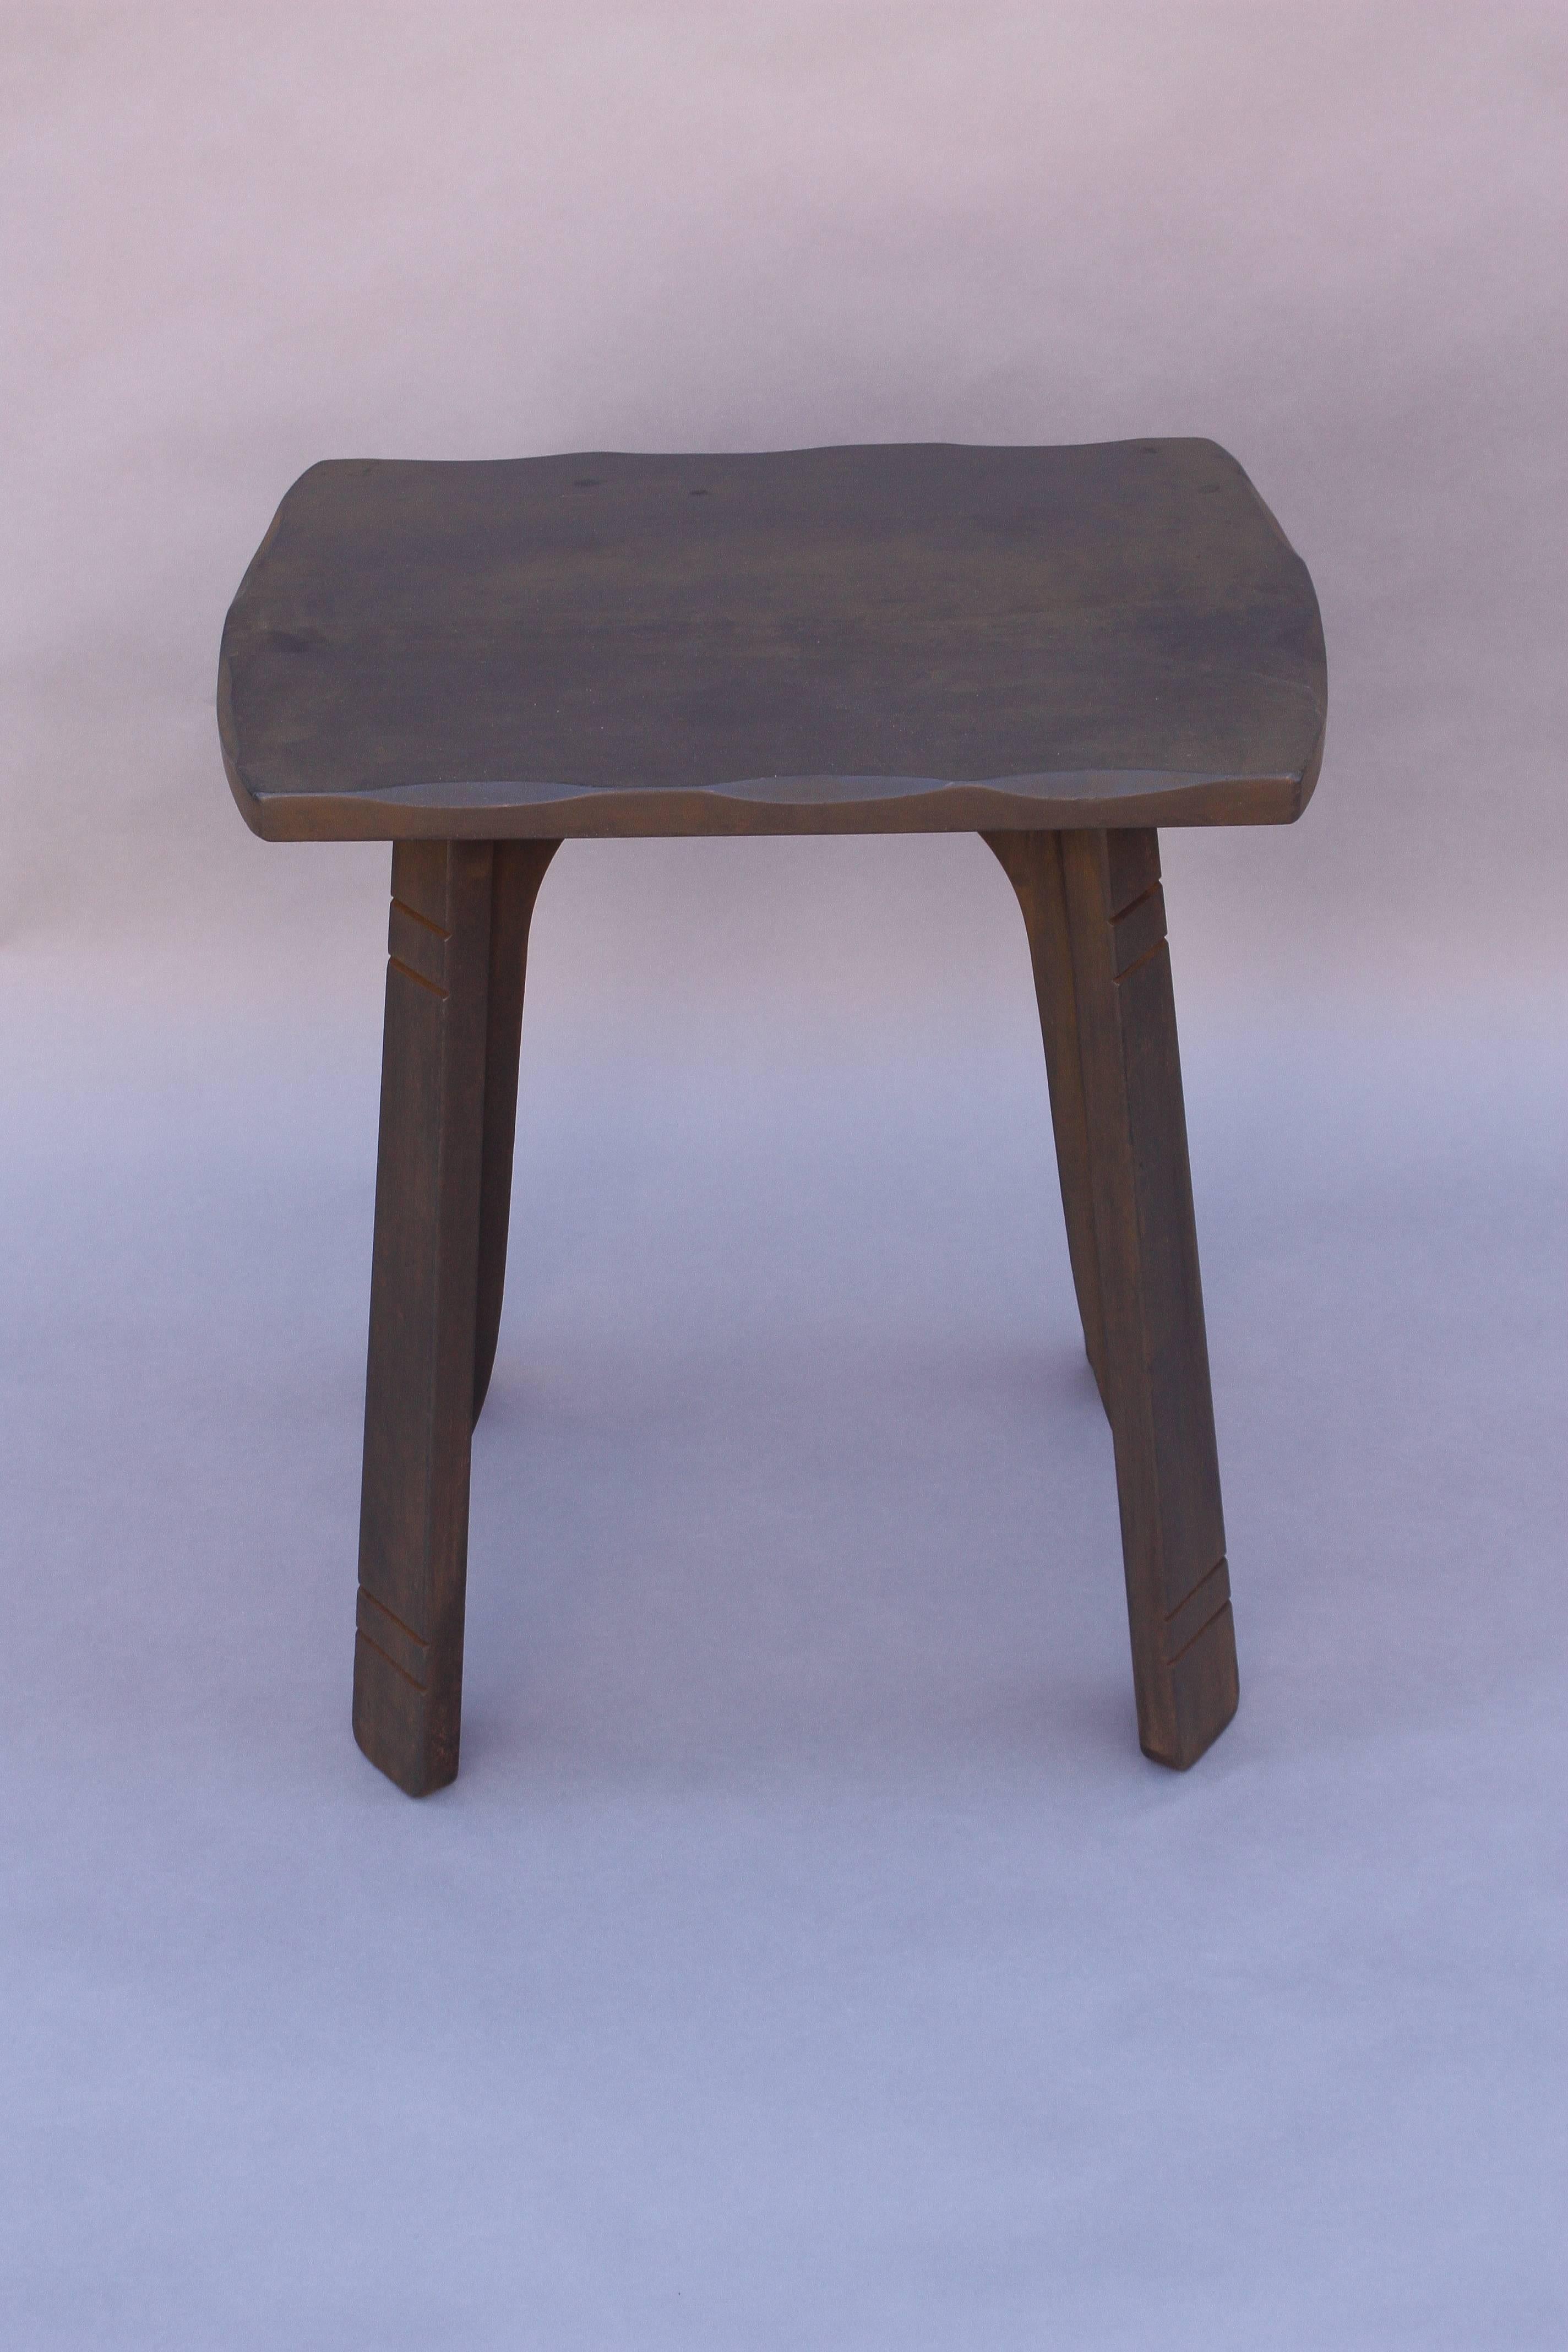 Wood 1930s Simple Monterey Period Table